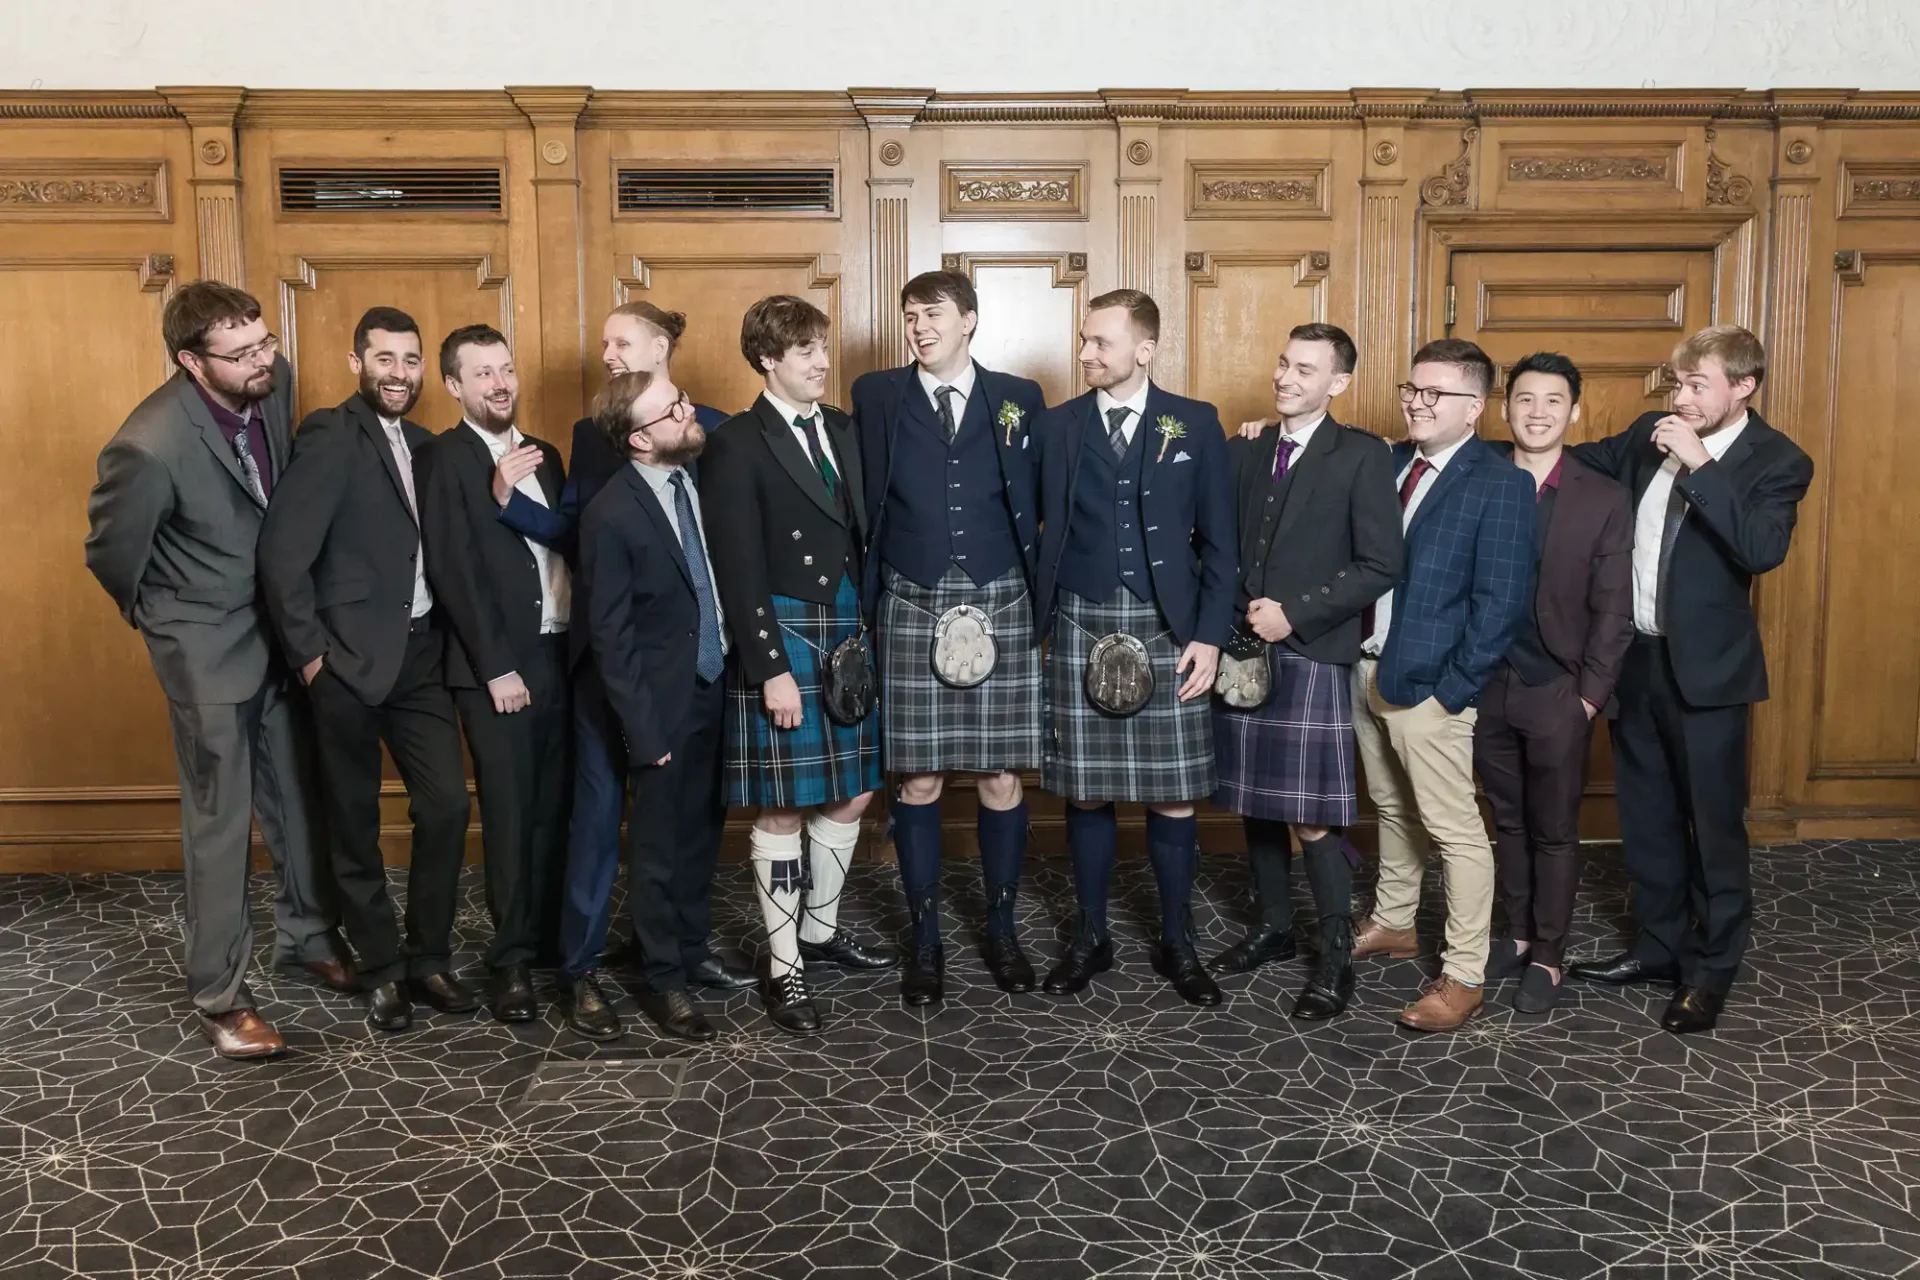 Group of men in formal attire, including suits and traditional kilts, smiling and posing together in a decorated room.